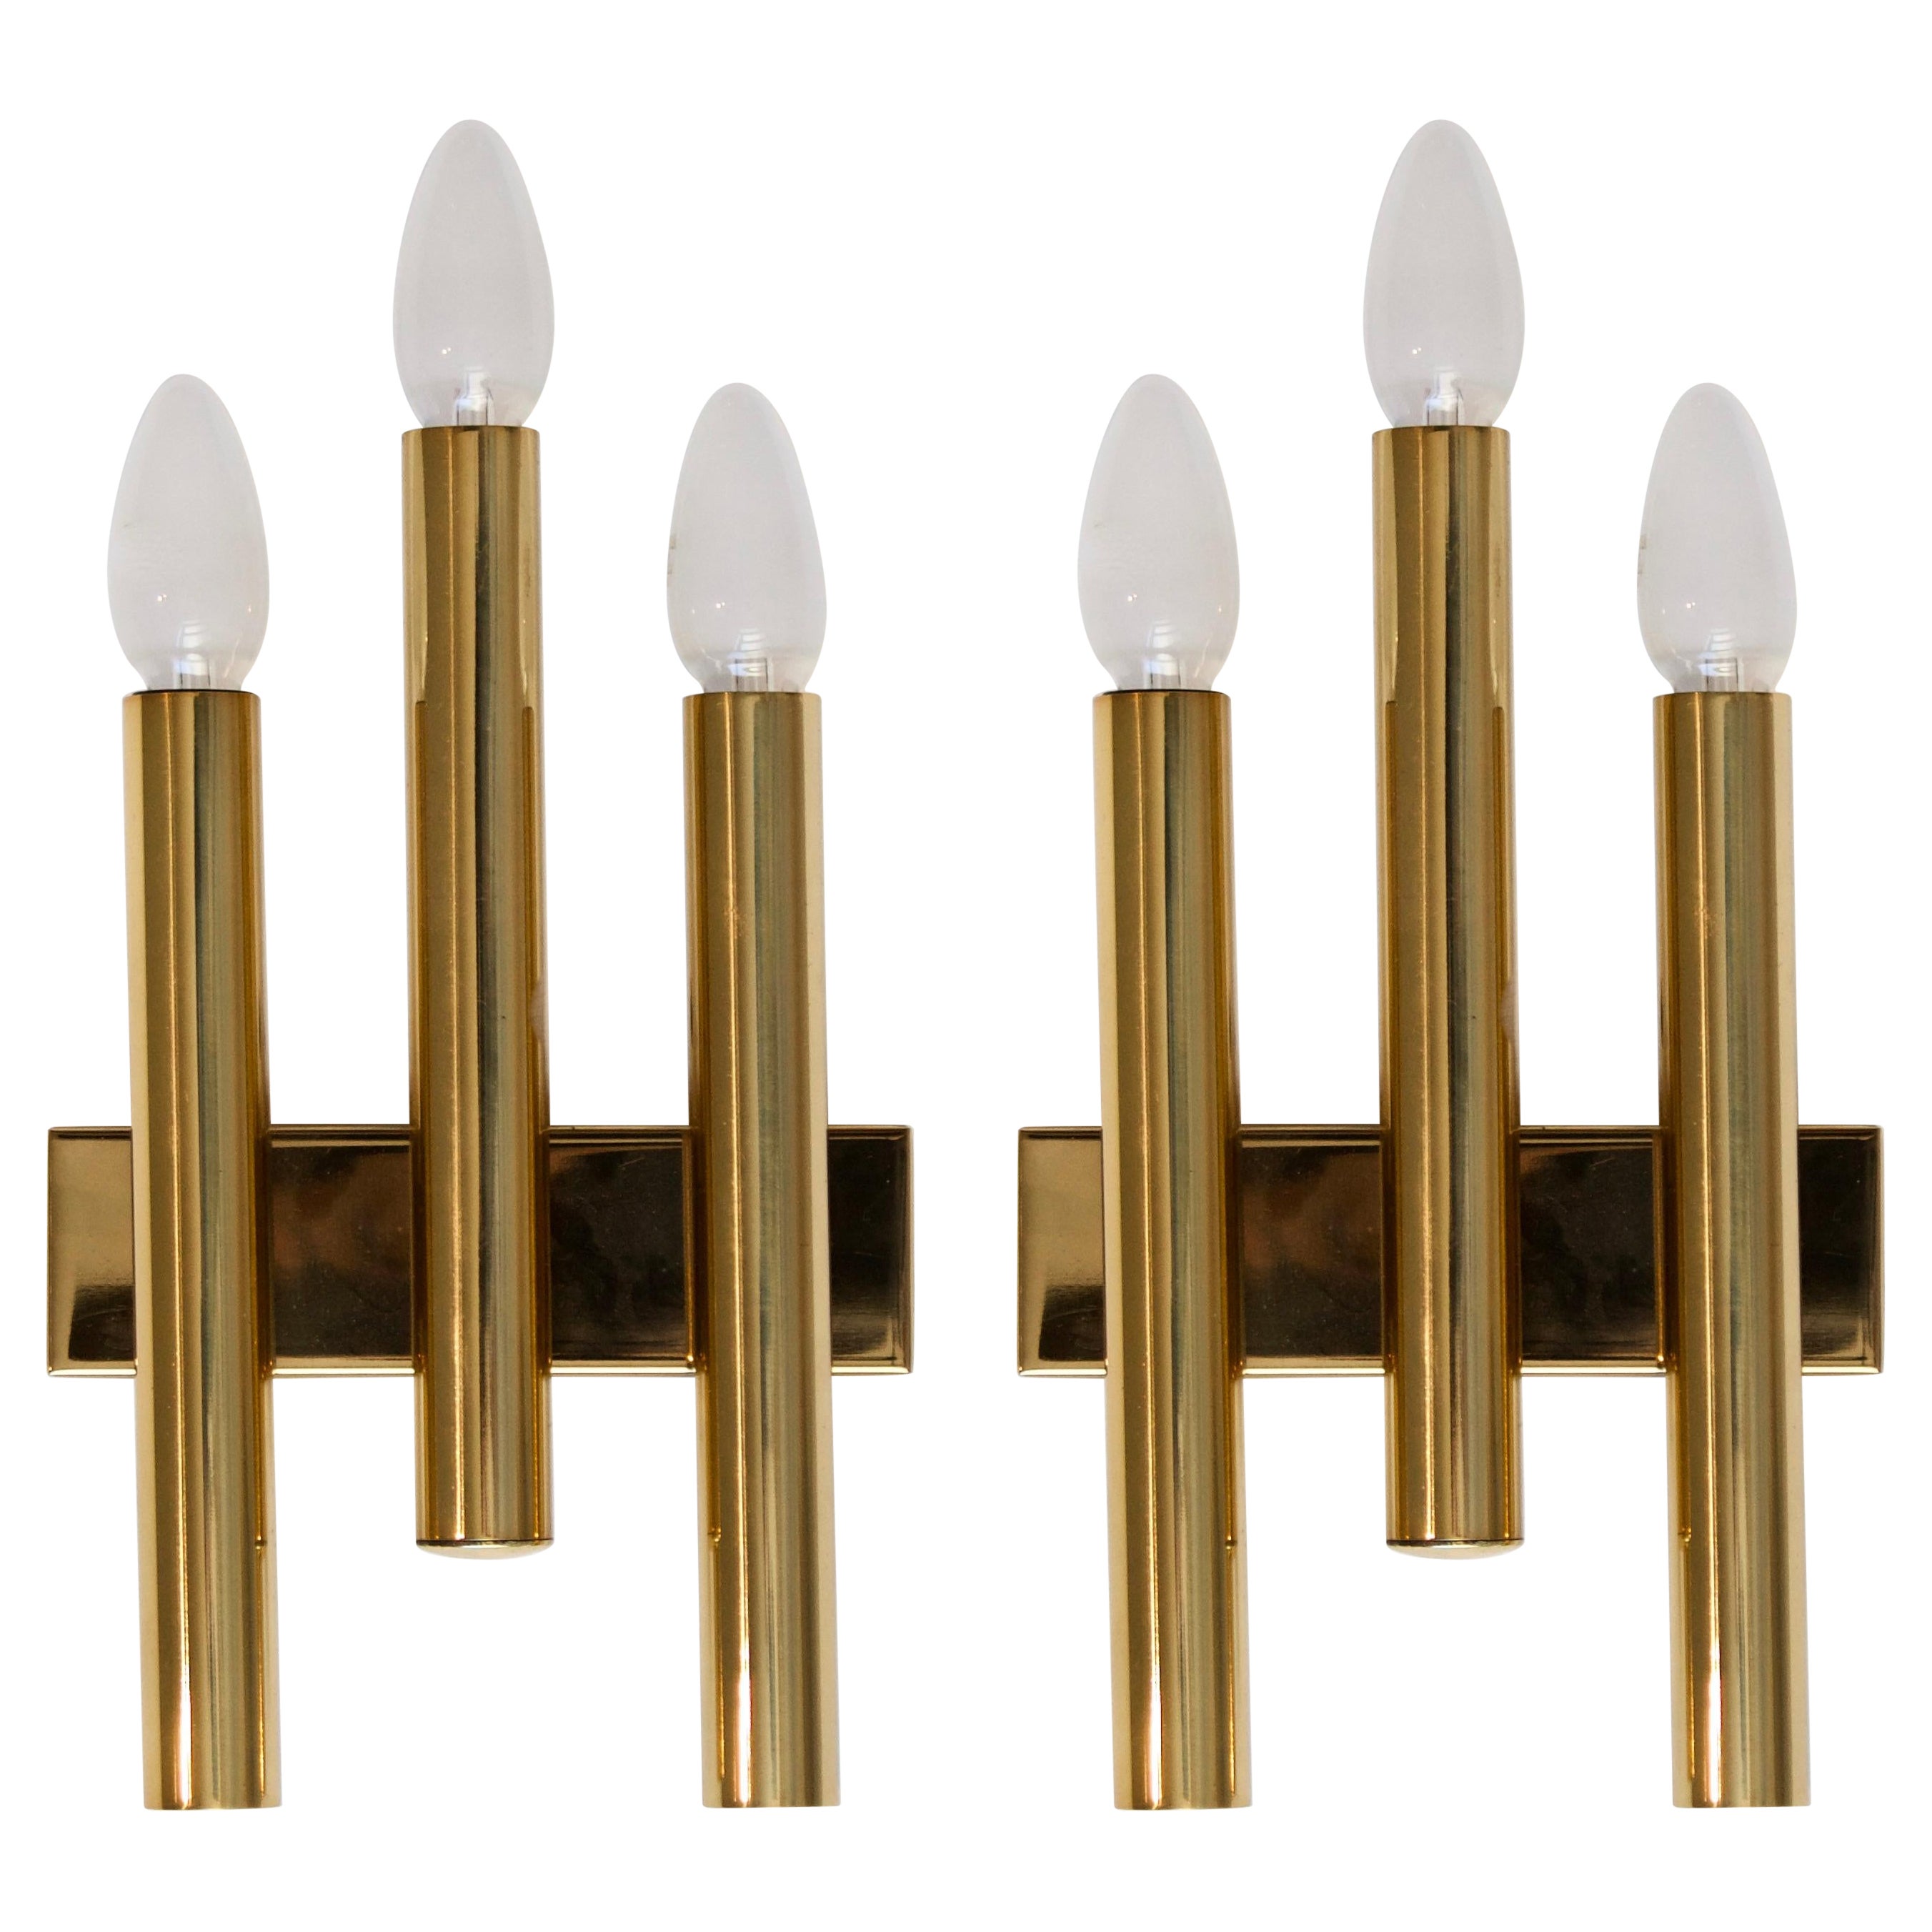 Candle, Three Armed Wall Lights / Sconces, Brass, Italy, 1960s